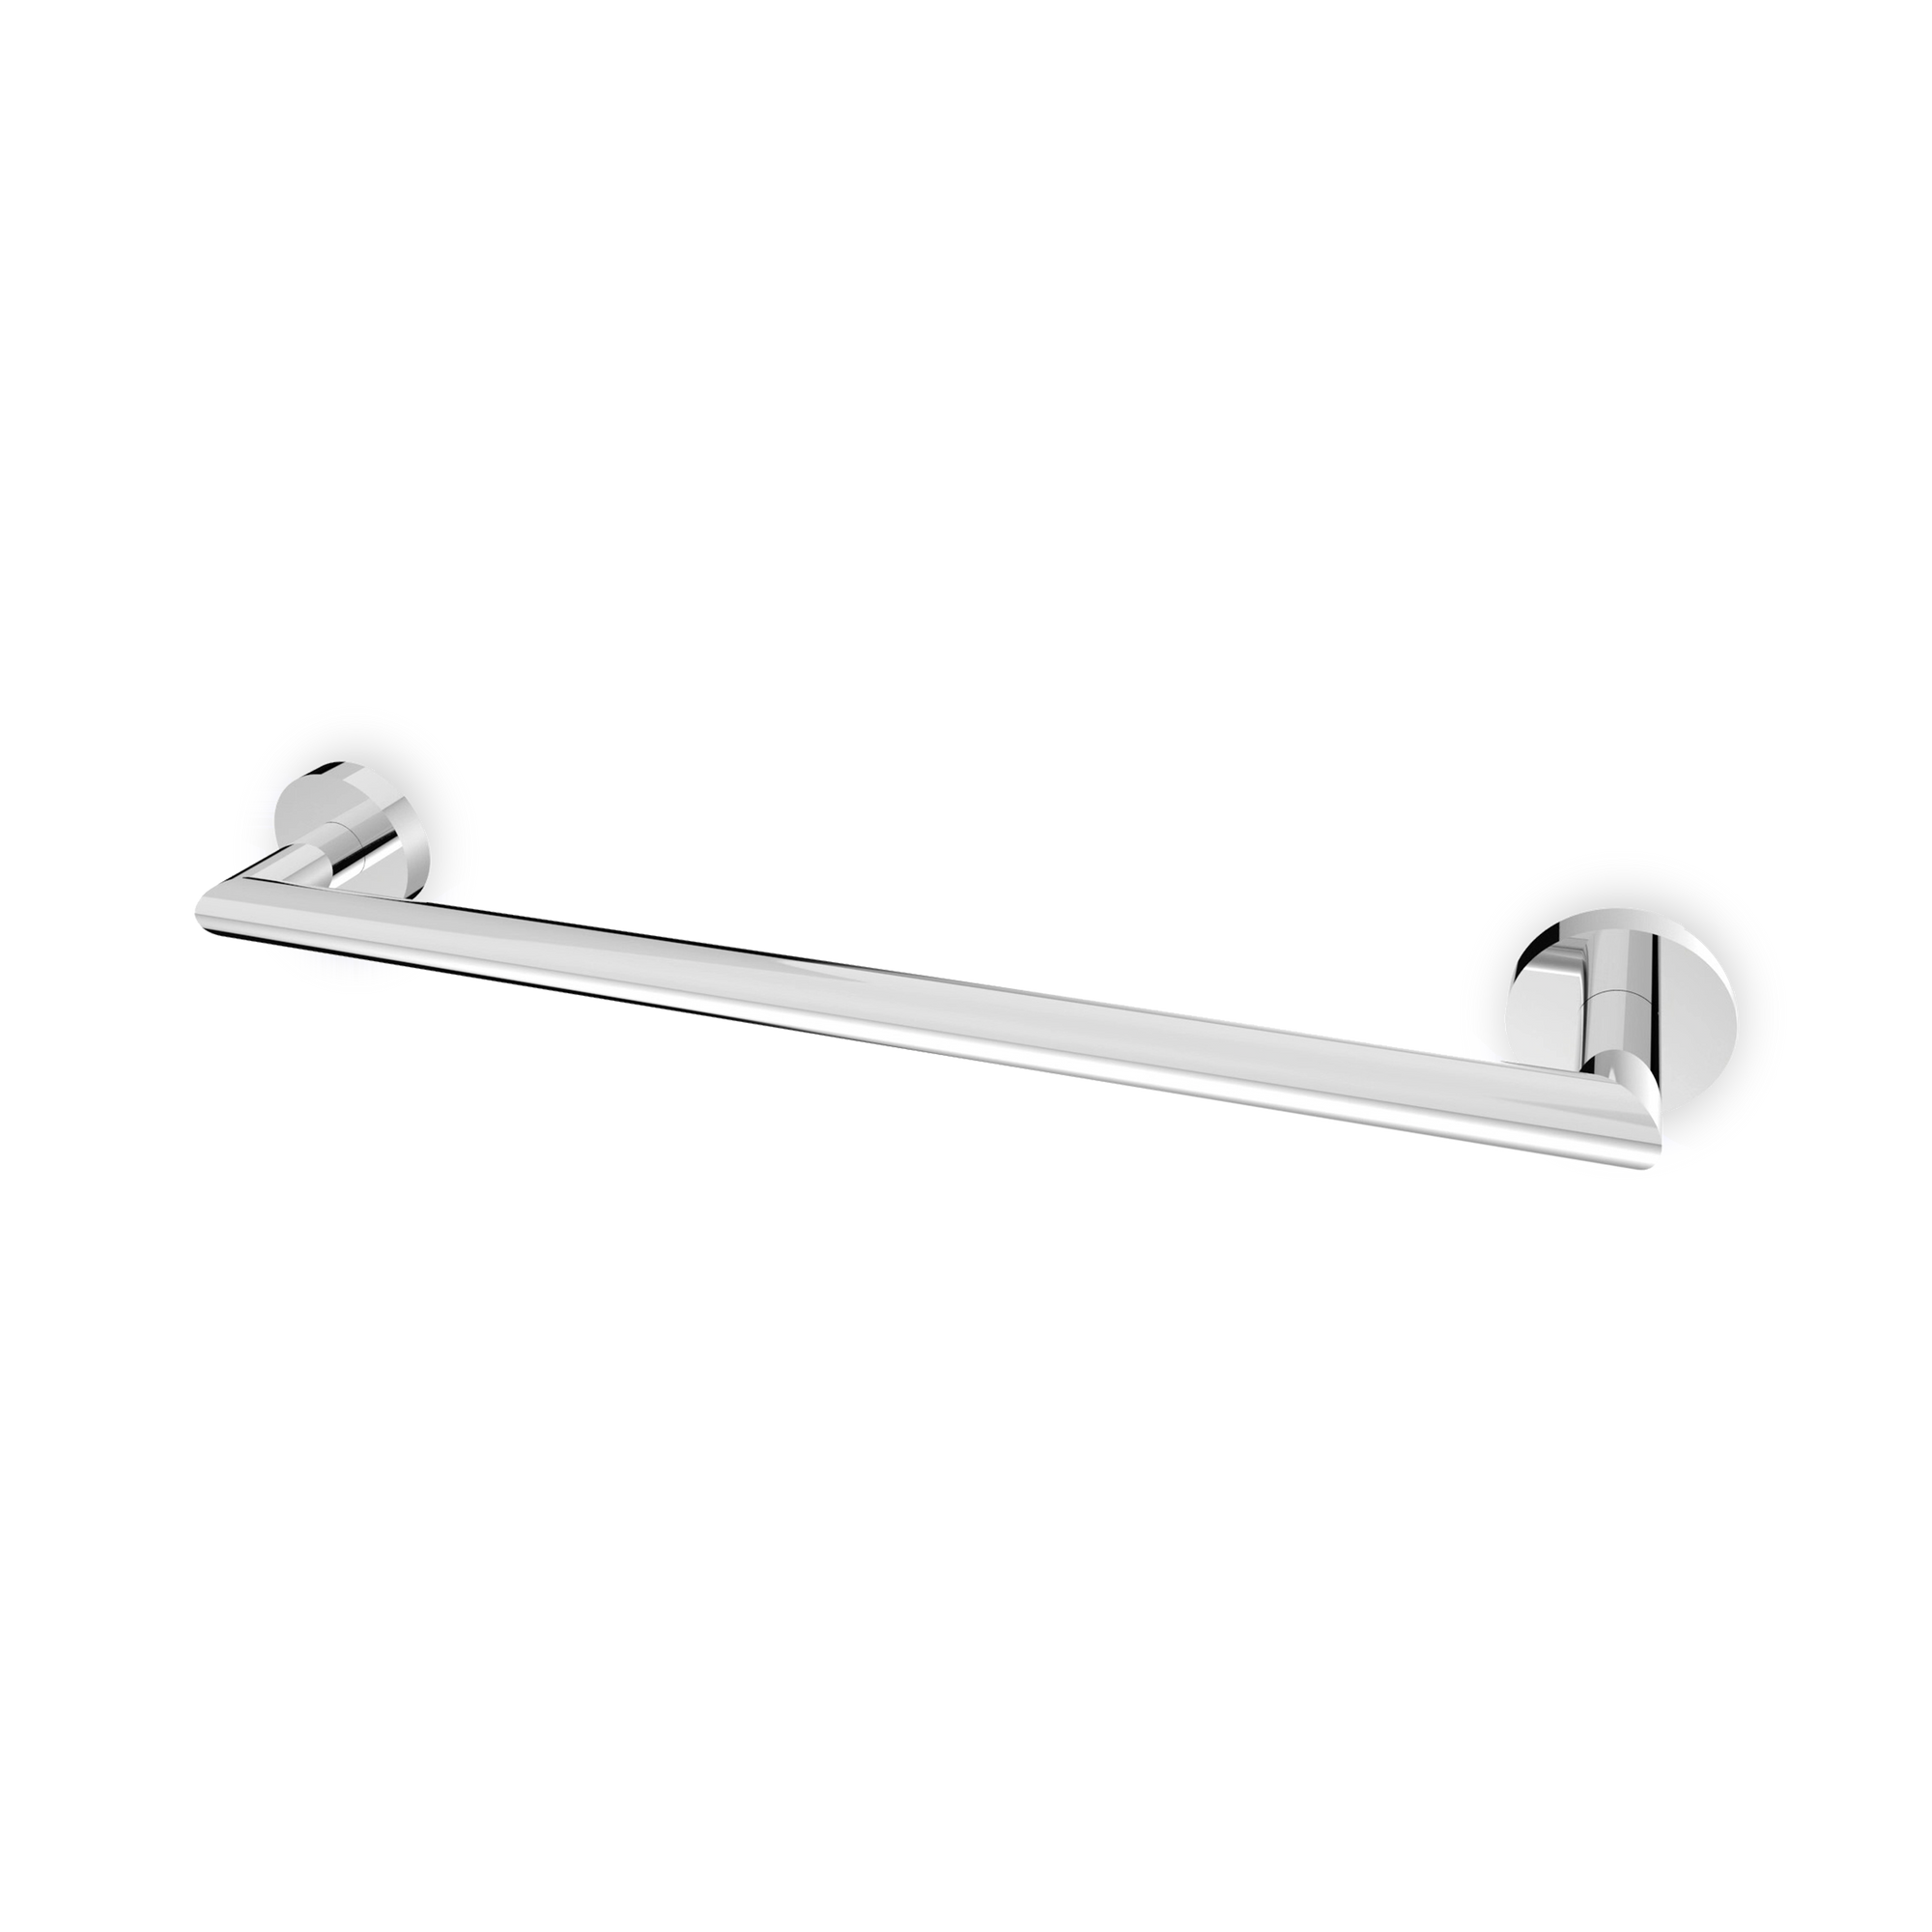 A cylindrical towel bar available in 18